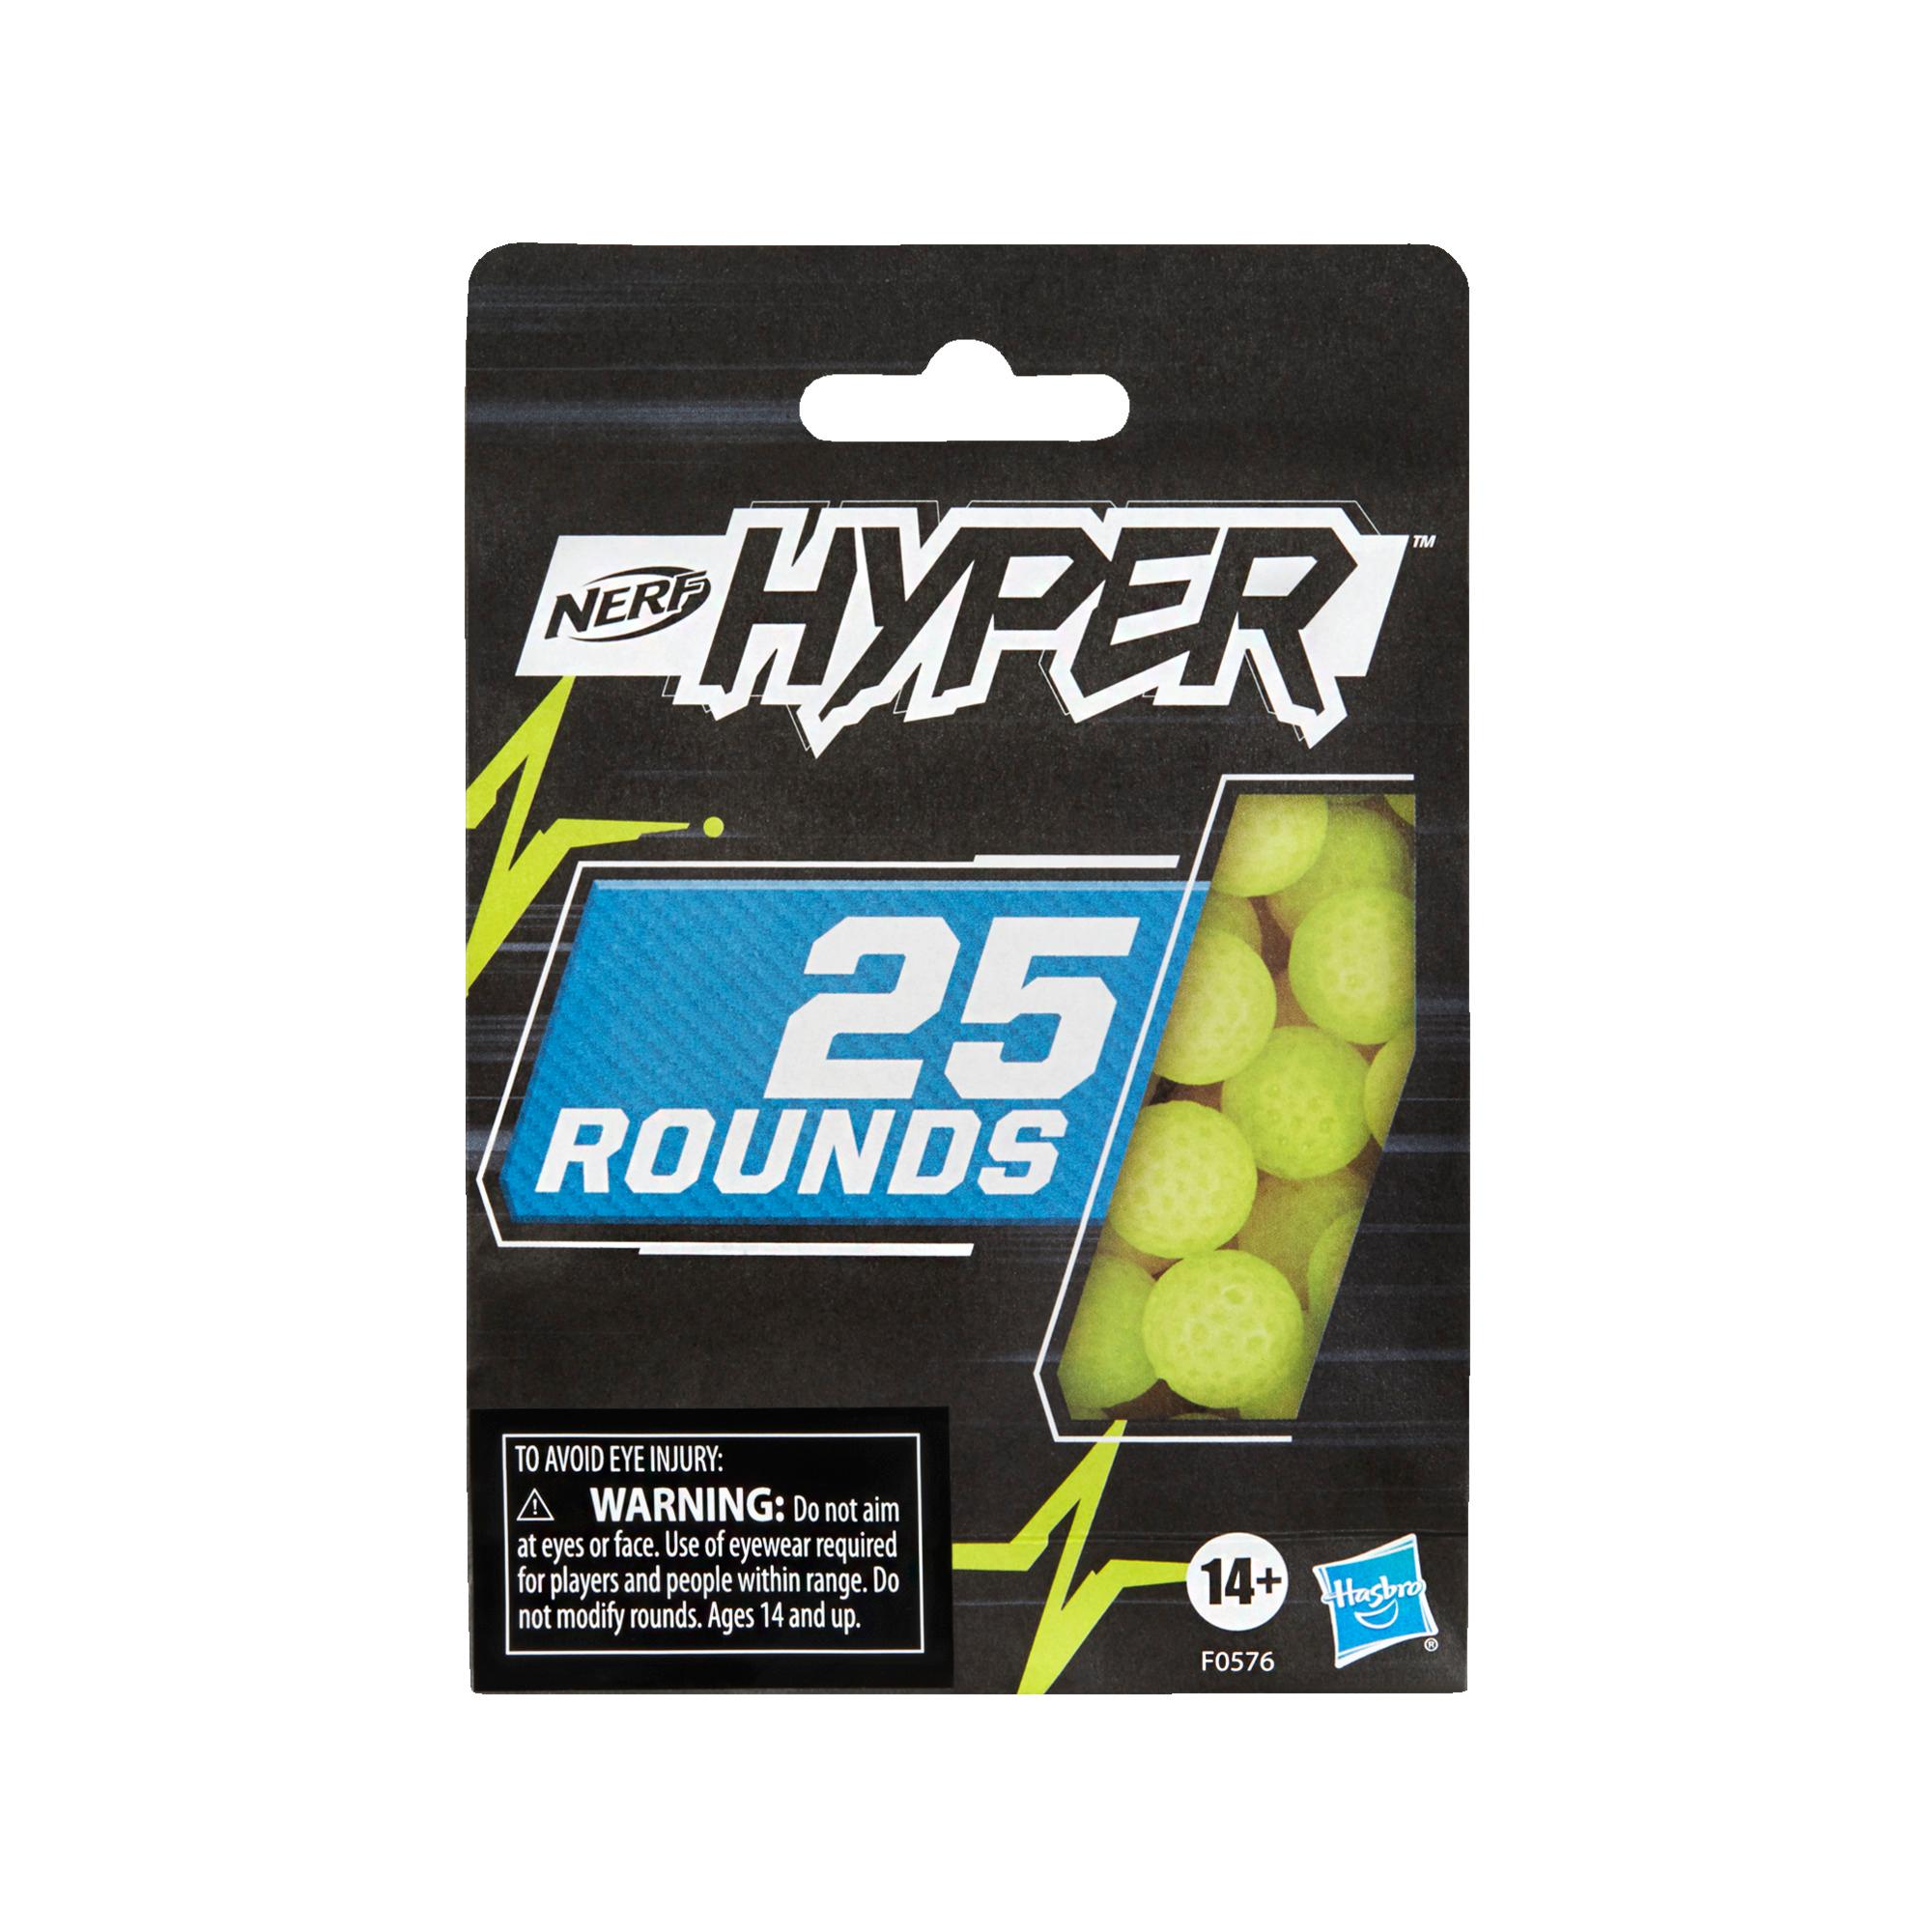 Nerf Hyper 25-Round Boost Refill -- Includes Pack of 25 Official Nerf Hyper Rounds -- For Use with Nerf Hyper Blasters